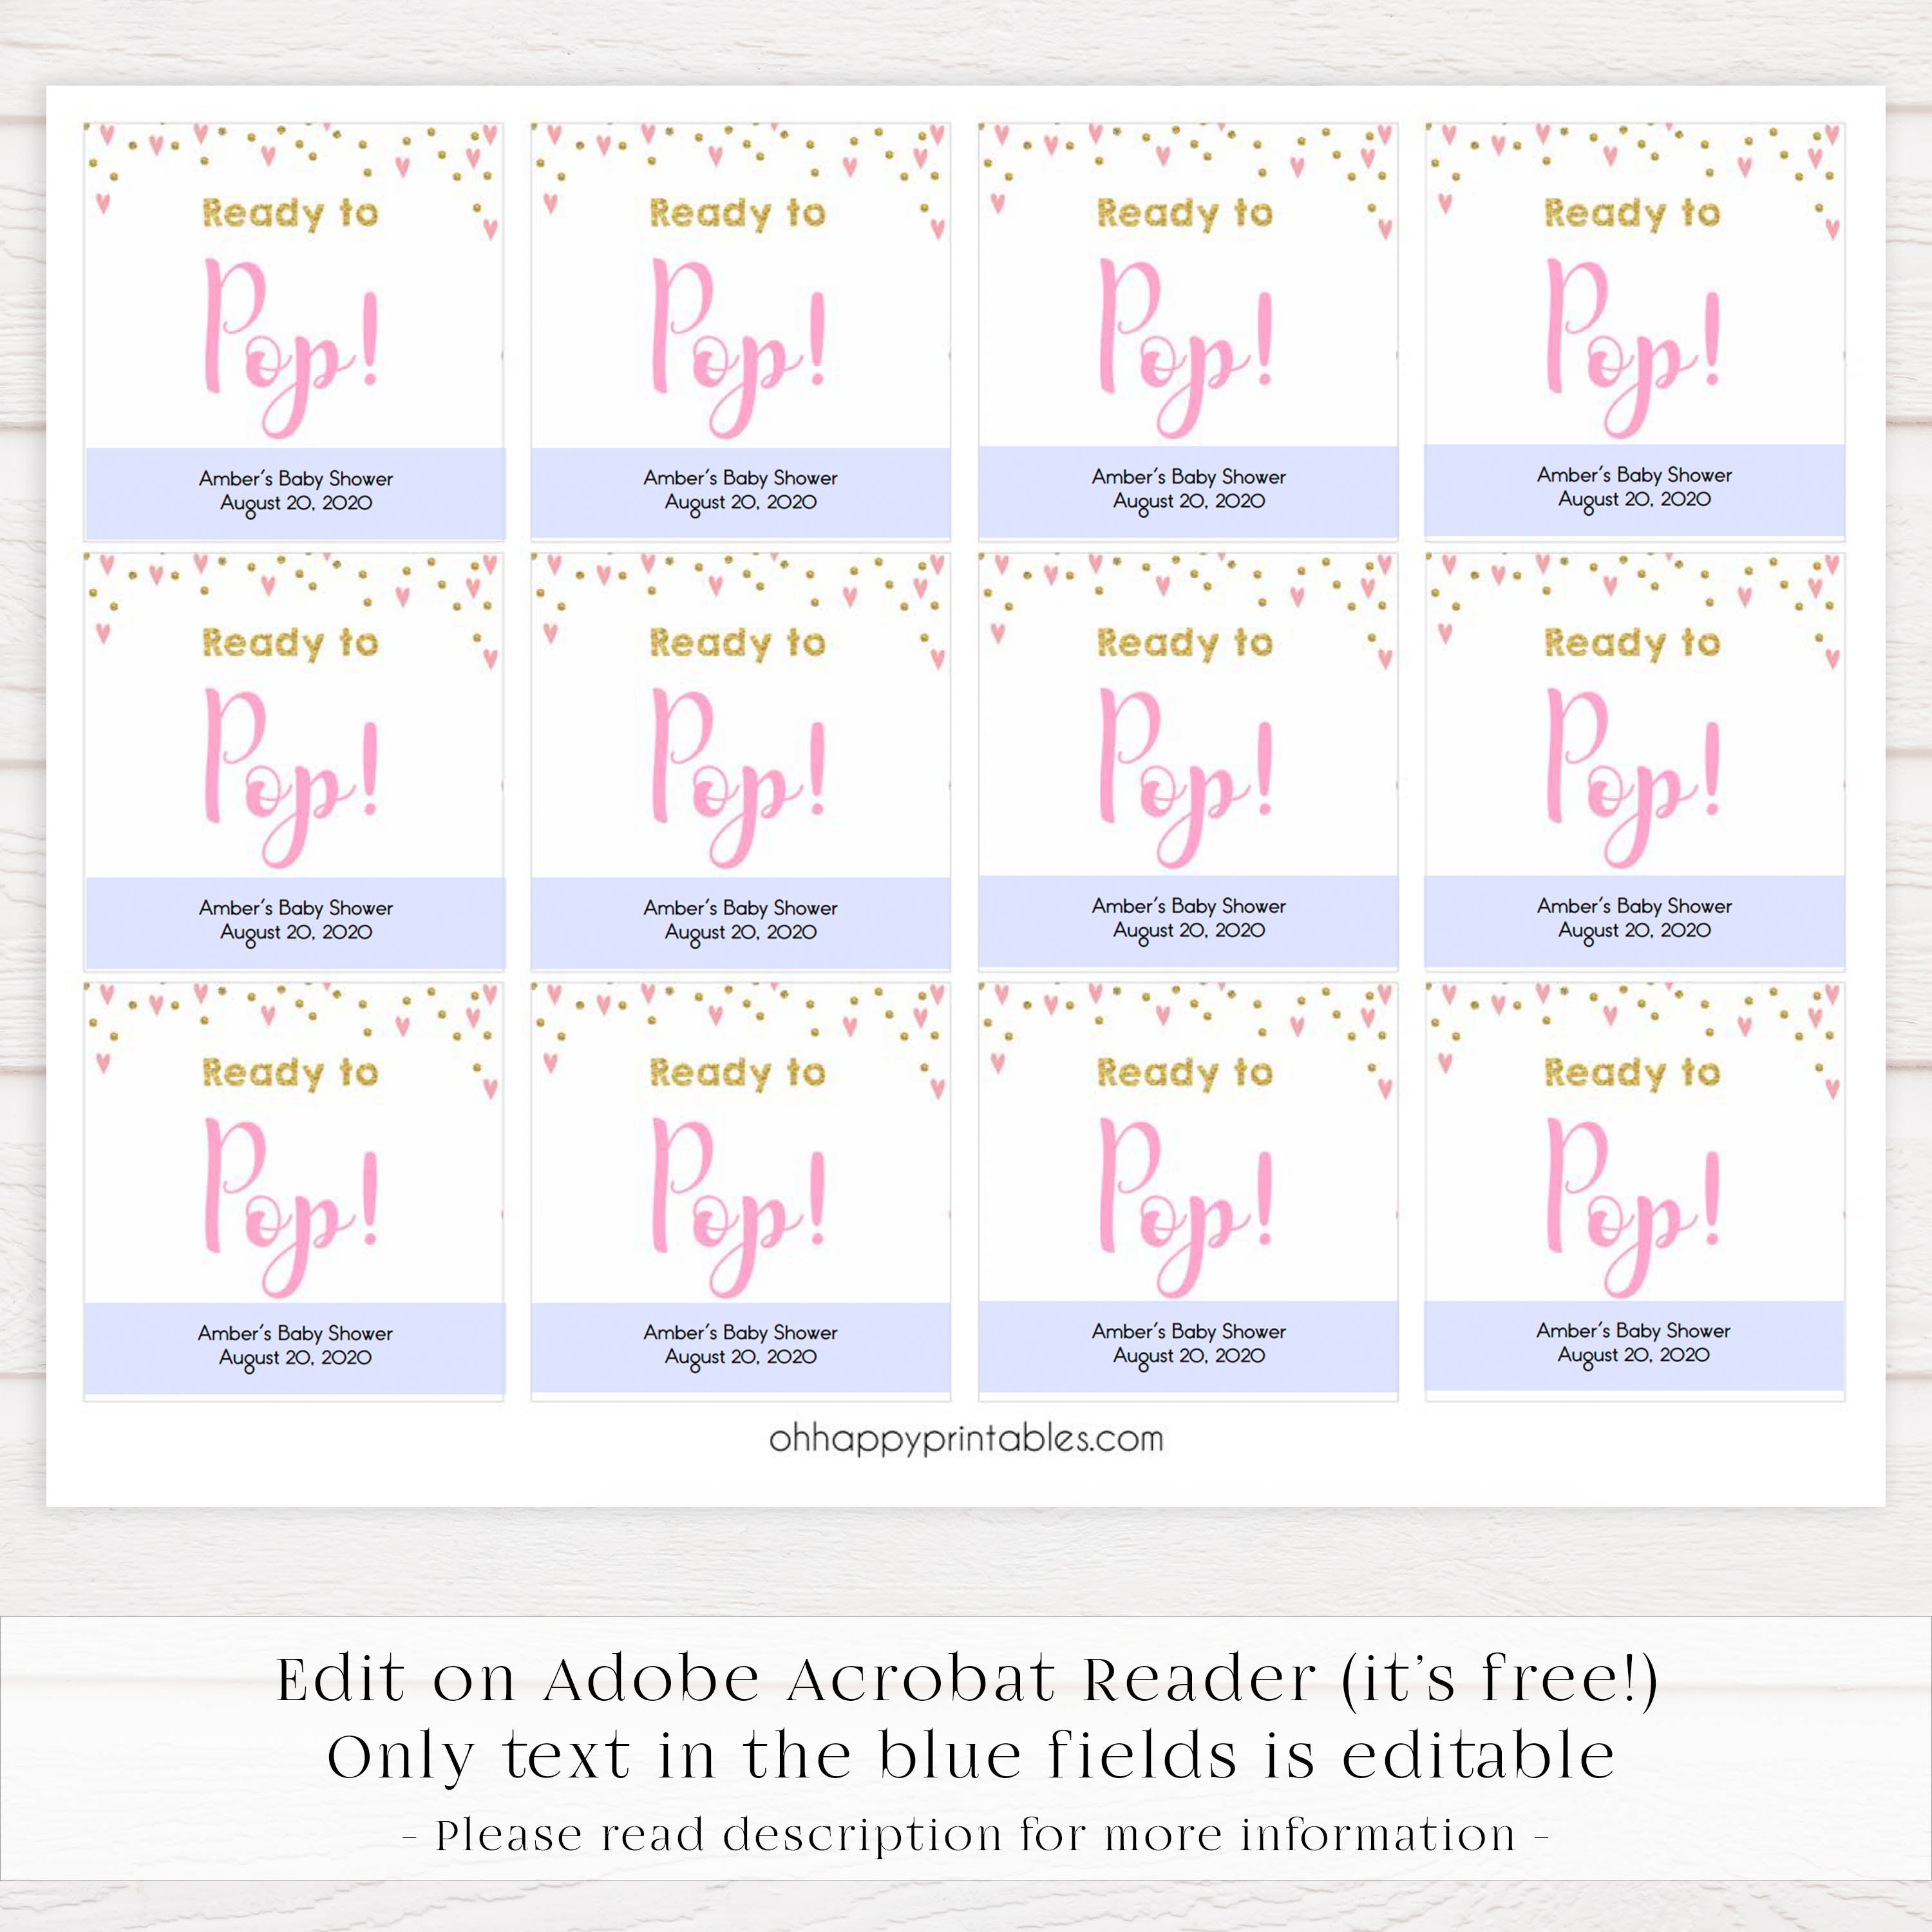 ready to pop tags, pop baby tags,Printable baby shower games, small pink hearts fun baby games, baby shower games, fun baby shower ideas, top baby shower ideas, gold baby shower, pink hearts baby shower ideas